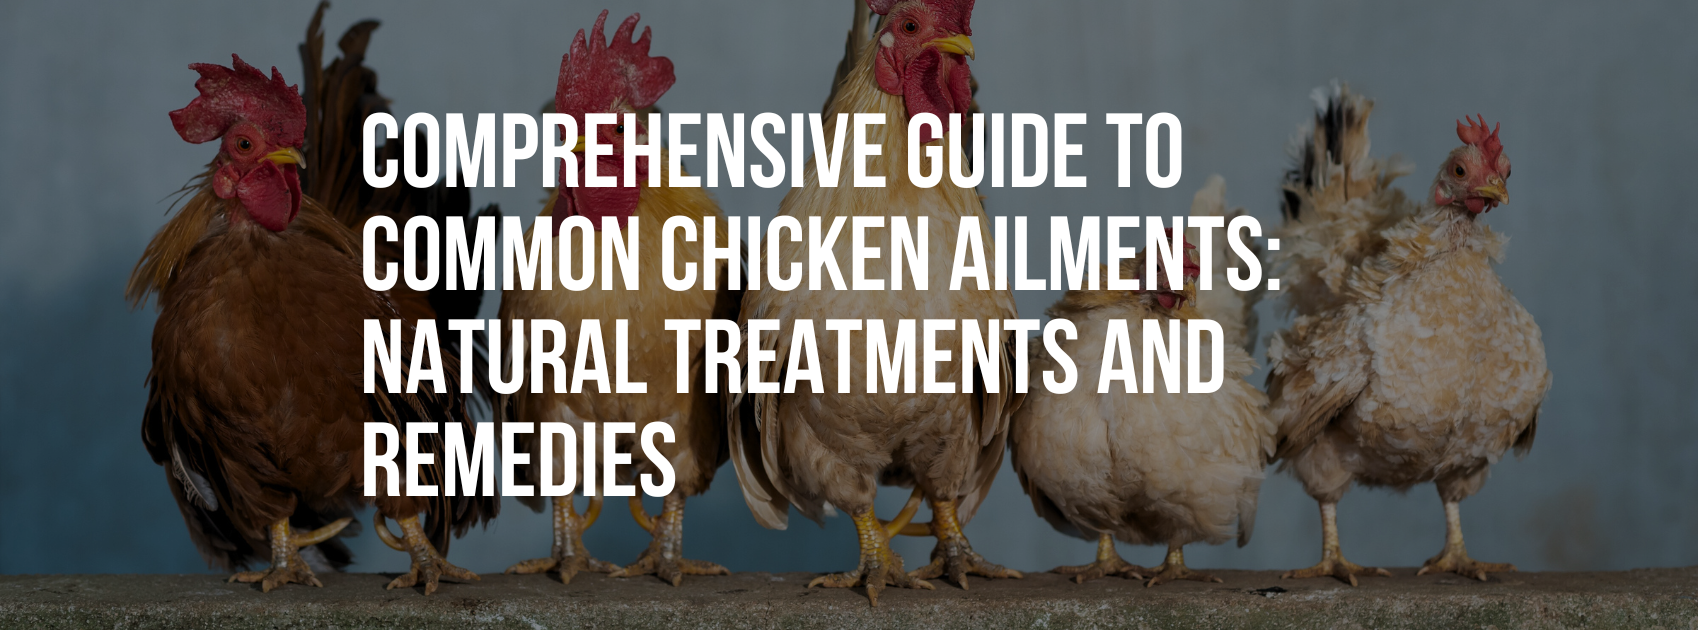 Comprehensive guide to common chicken ailments: Natural treatments and remedies